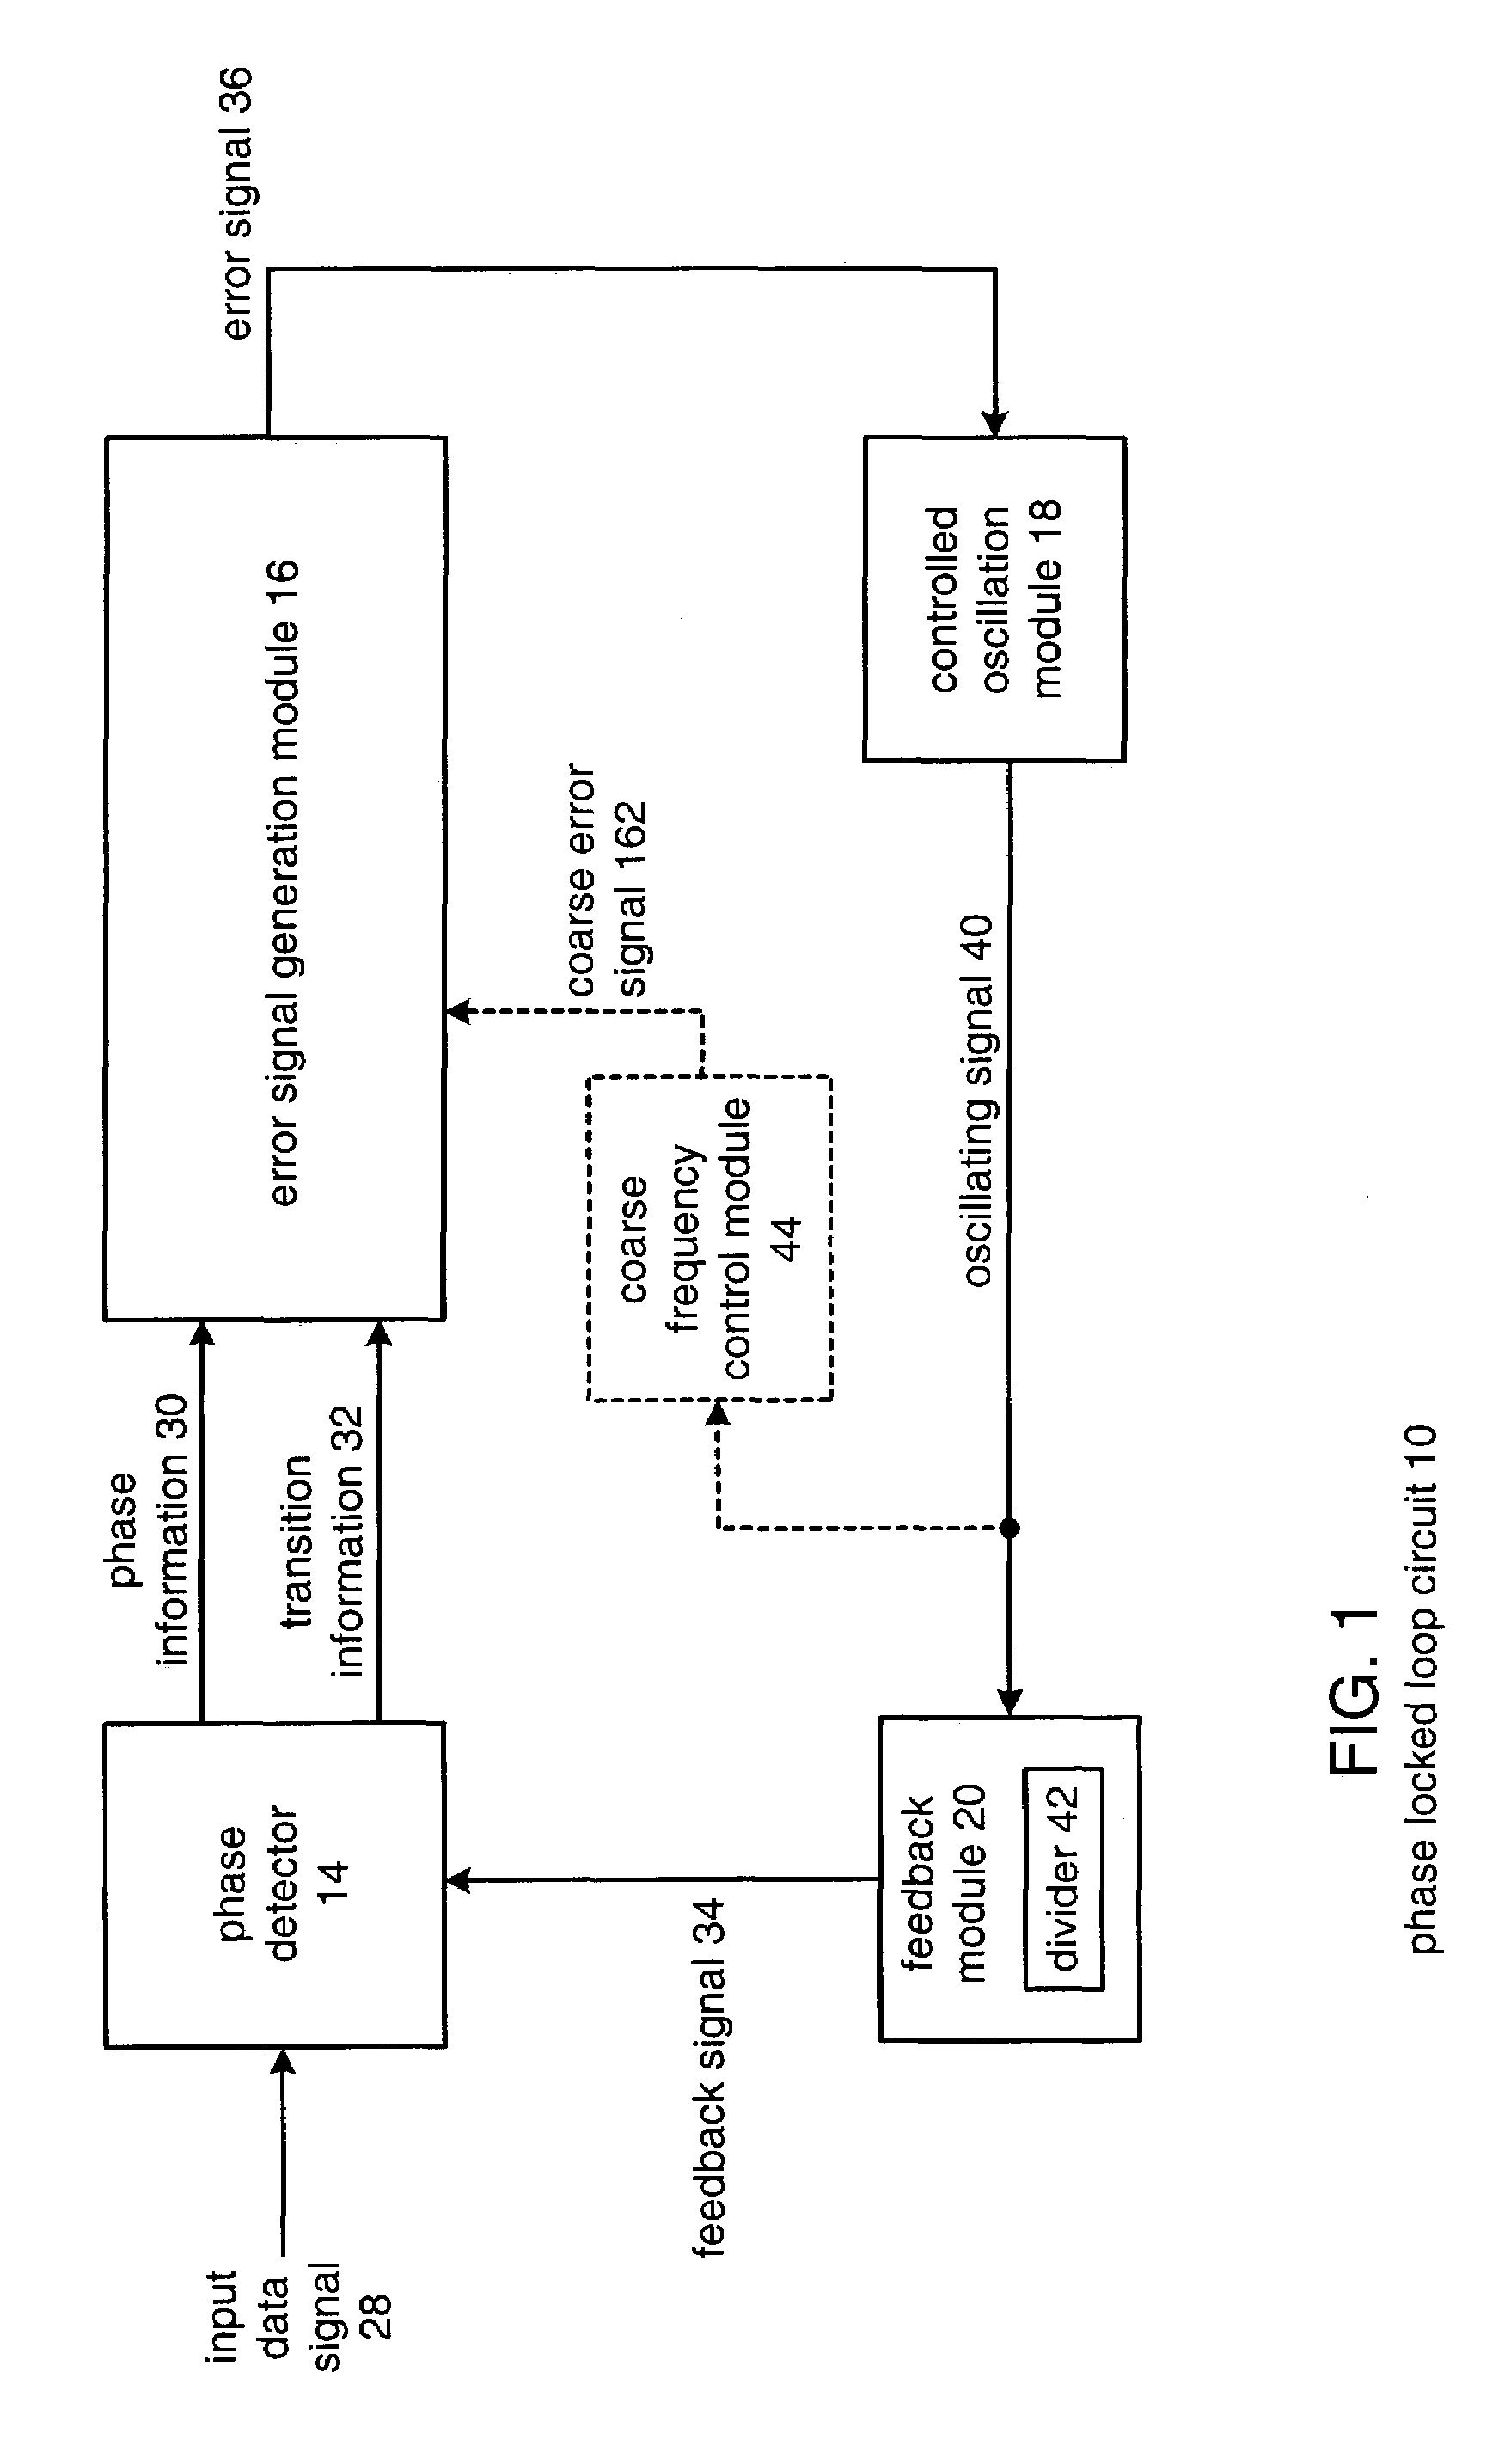 High speed phase detector architecture